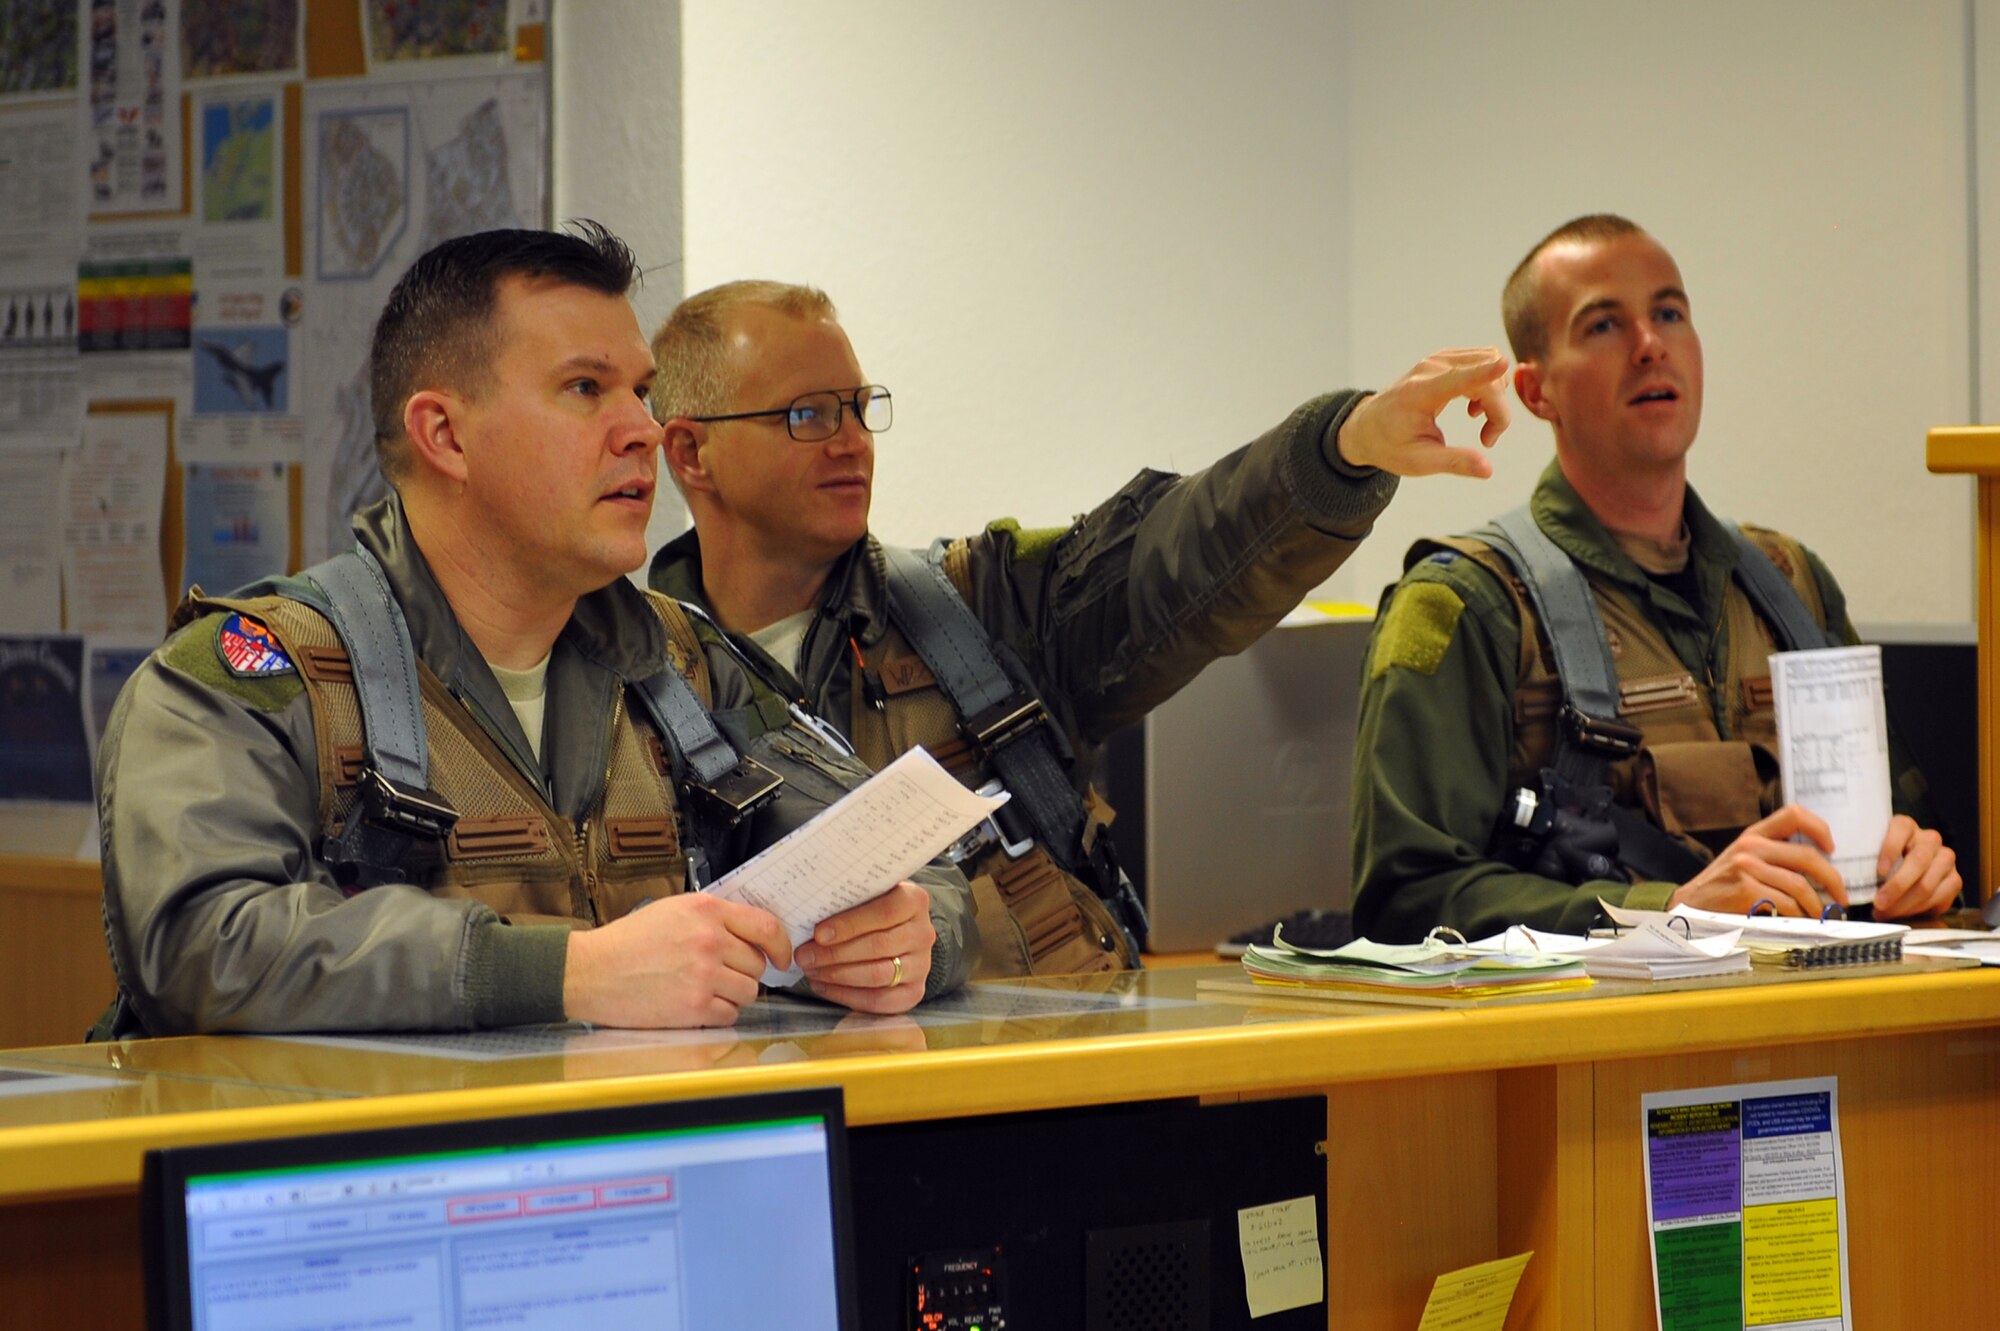 SPANGDAHLEM AIR BASE, Germany – Lt. Col. Robert Petty, left, U.S. Air Forces in Europe Standards and Evaluations Branch chief, Col. Chris Weggeman, center, 52nd Fighter Wing commander, and Capt. Mark Hickie, right, 52nd FW executive officer, read flight information and take notes before a briefing inside Bldg. 108 here Feb. 21. Twelve Airmen work at the squadron’s operations desk and are responsible for coordinating with base operations, weather operations and aircraft maintenance to ensure flight operations run smoothly. The operations desk is also responsible for gathering and organizing flight information to help log flight hours and brief pilots before, during and after flights. (U.S. Air Force photo by Airman 1st Class Dillon Davis/Released)